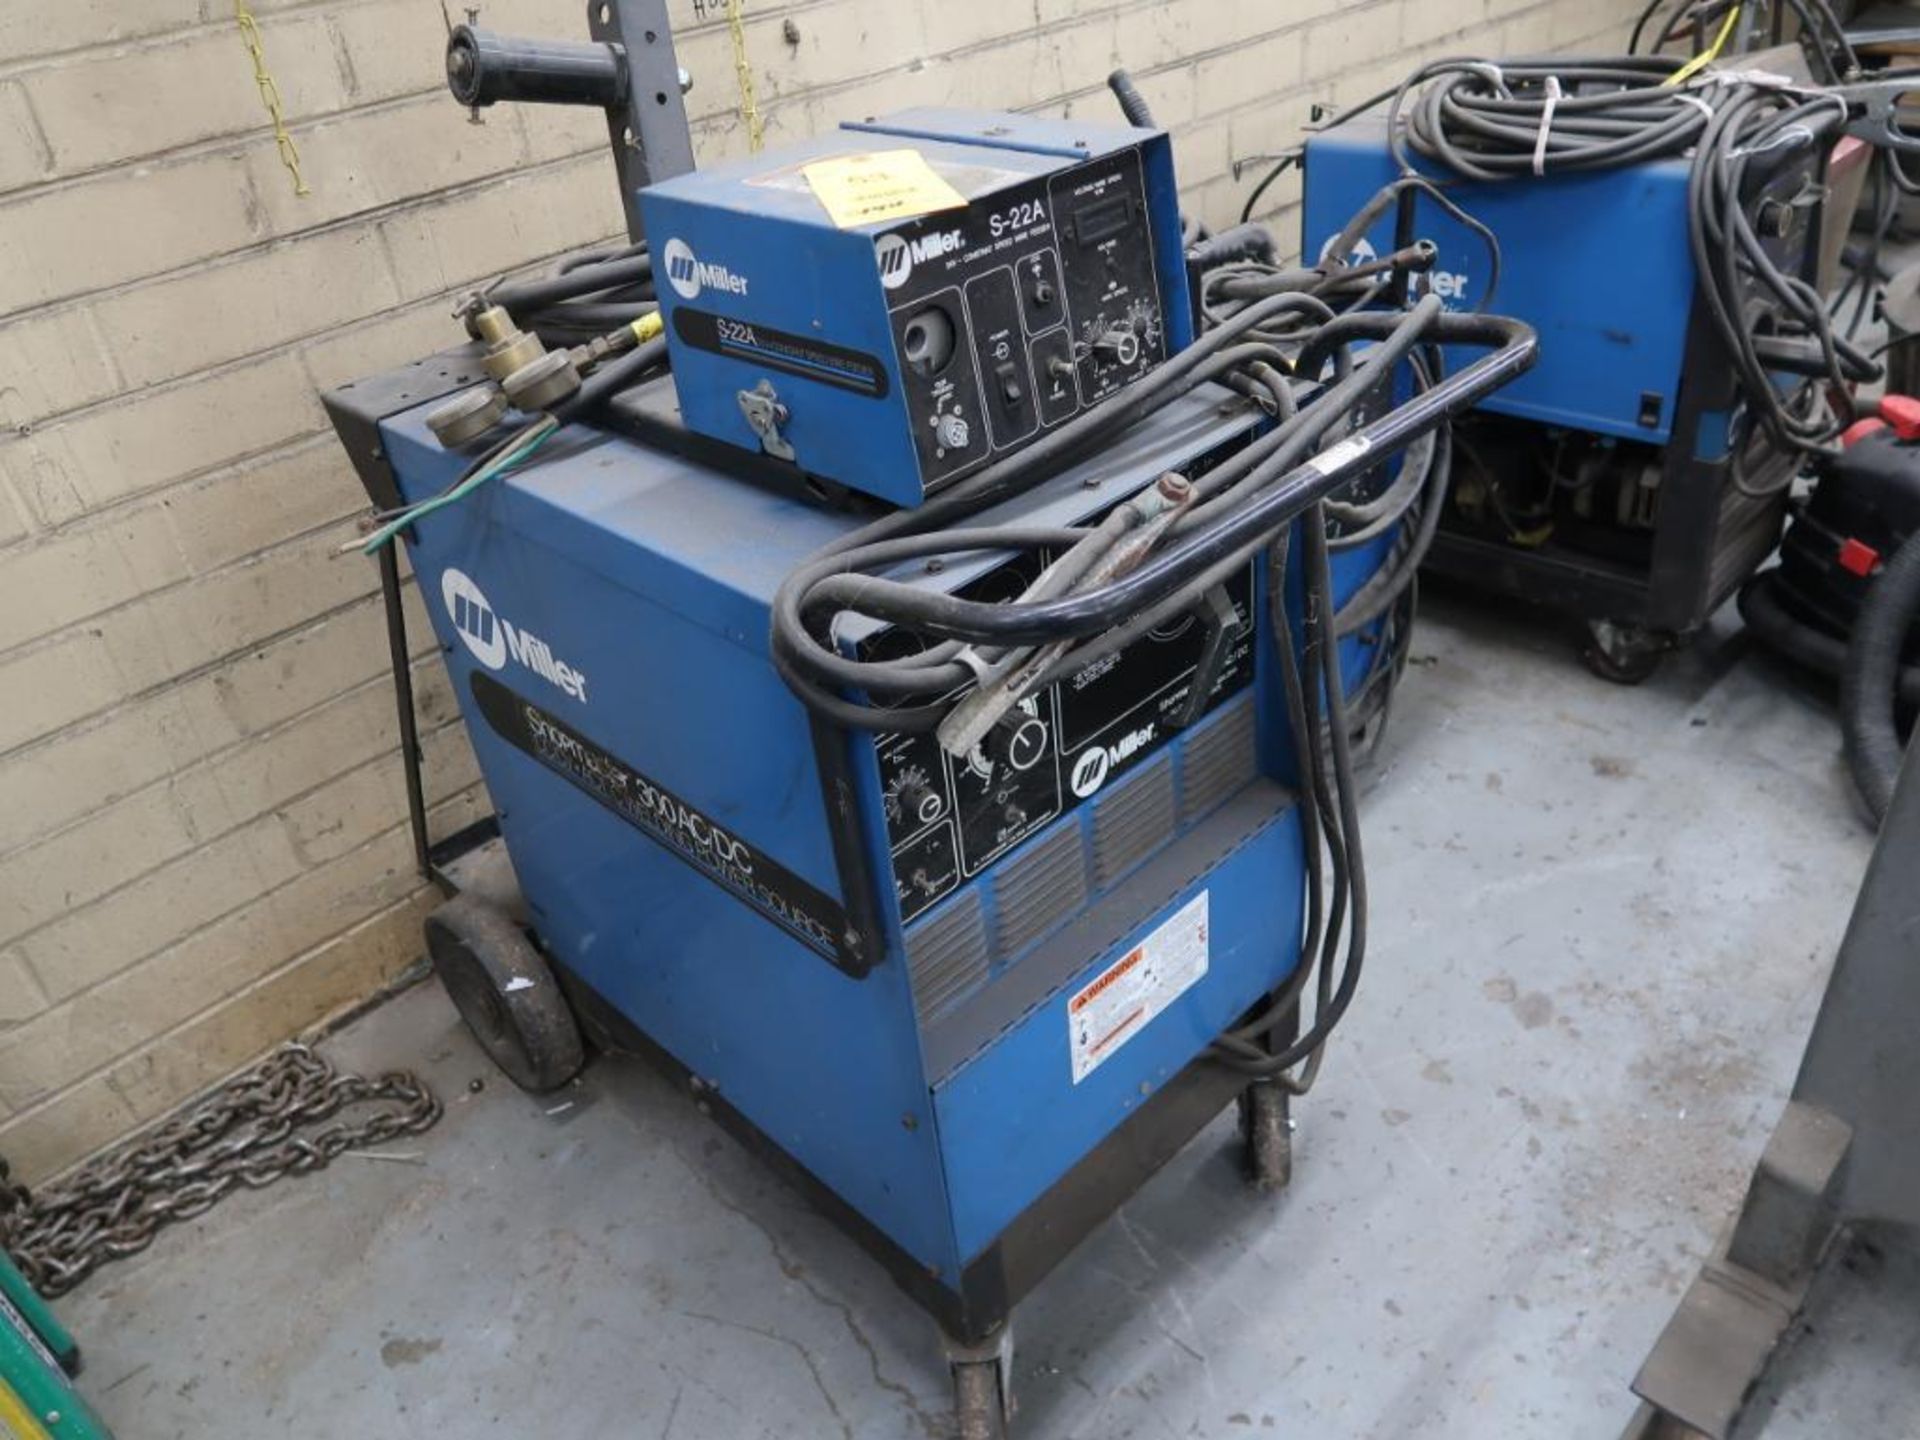 MILLER Portable AC/DC Welder Model Shopmaster 300, with S-22A Wire Feeder